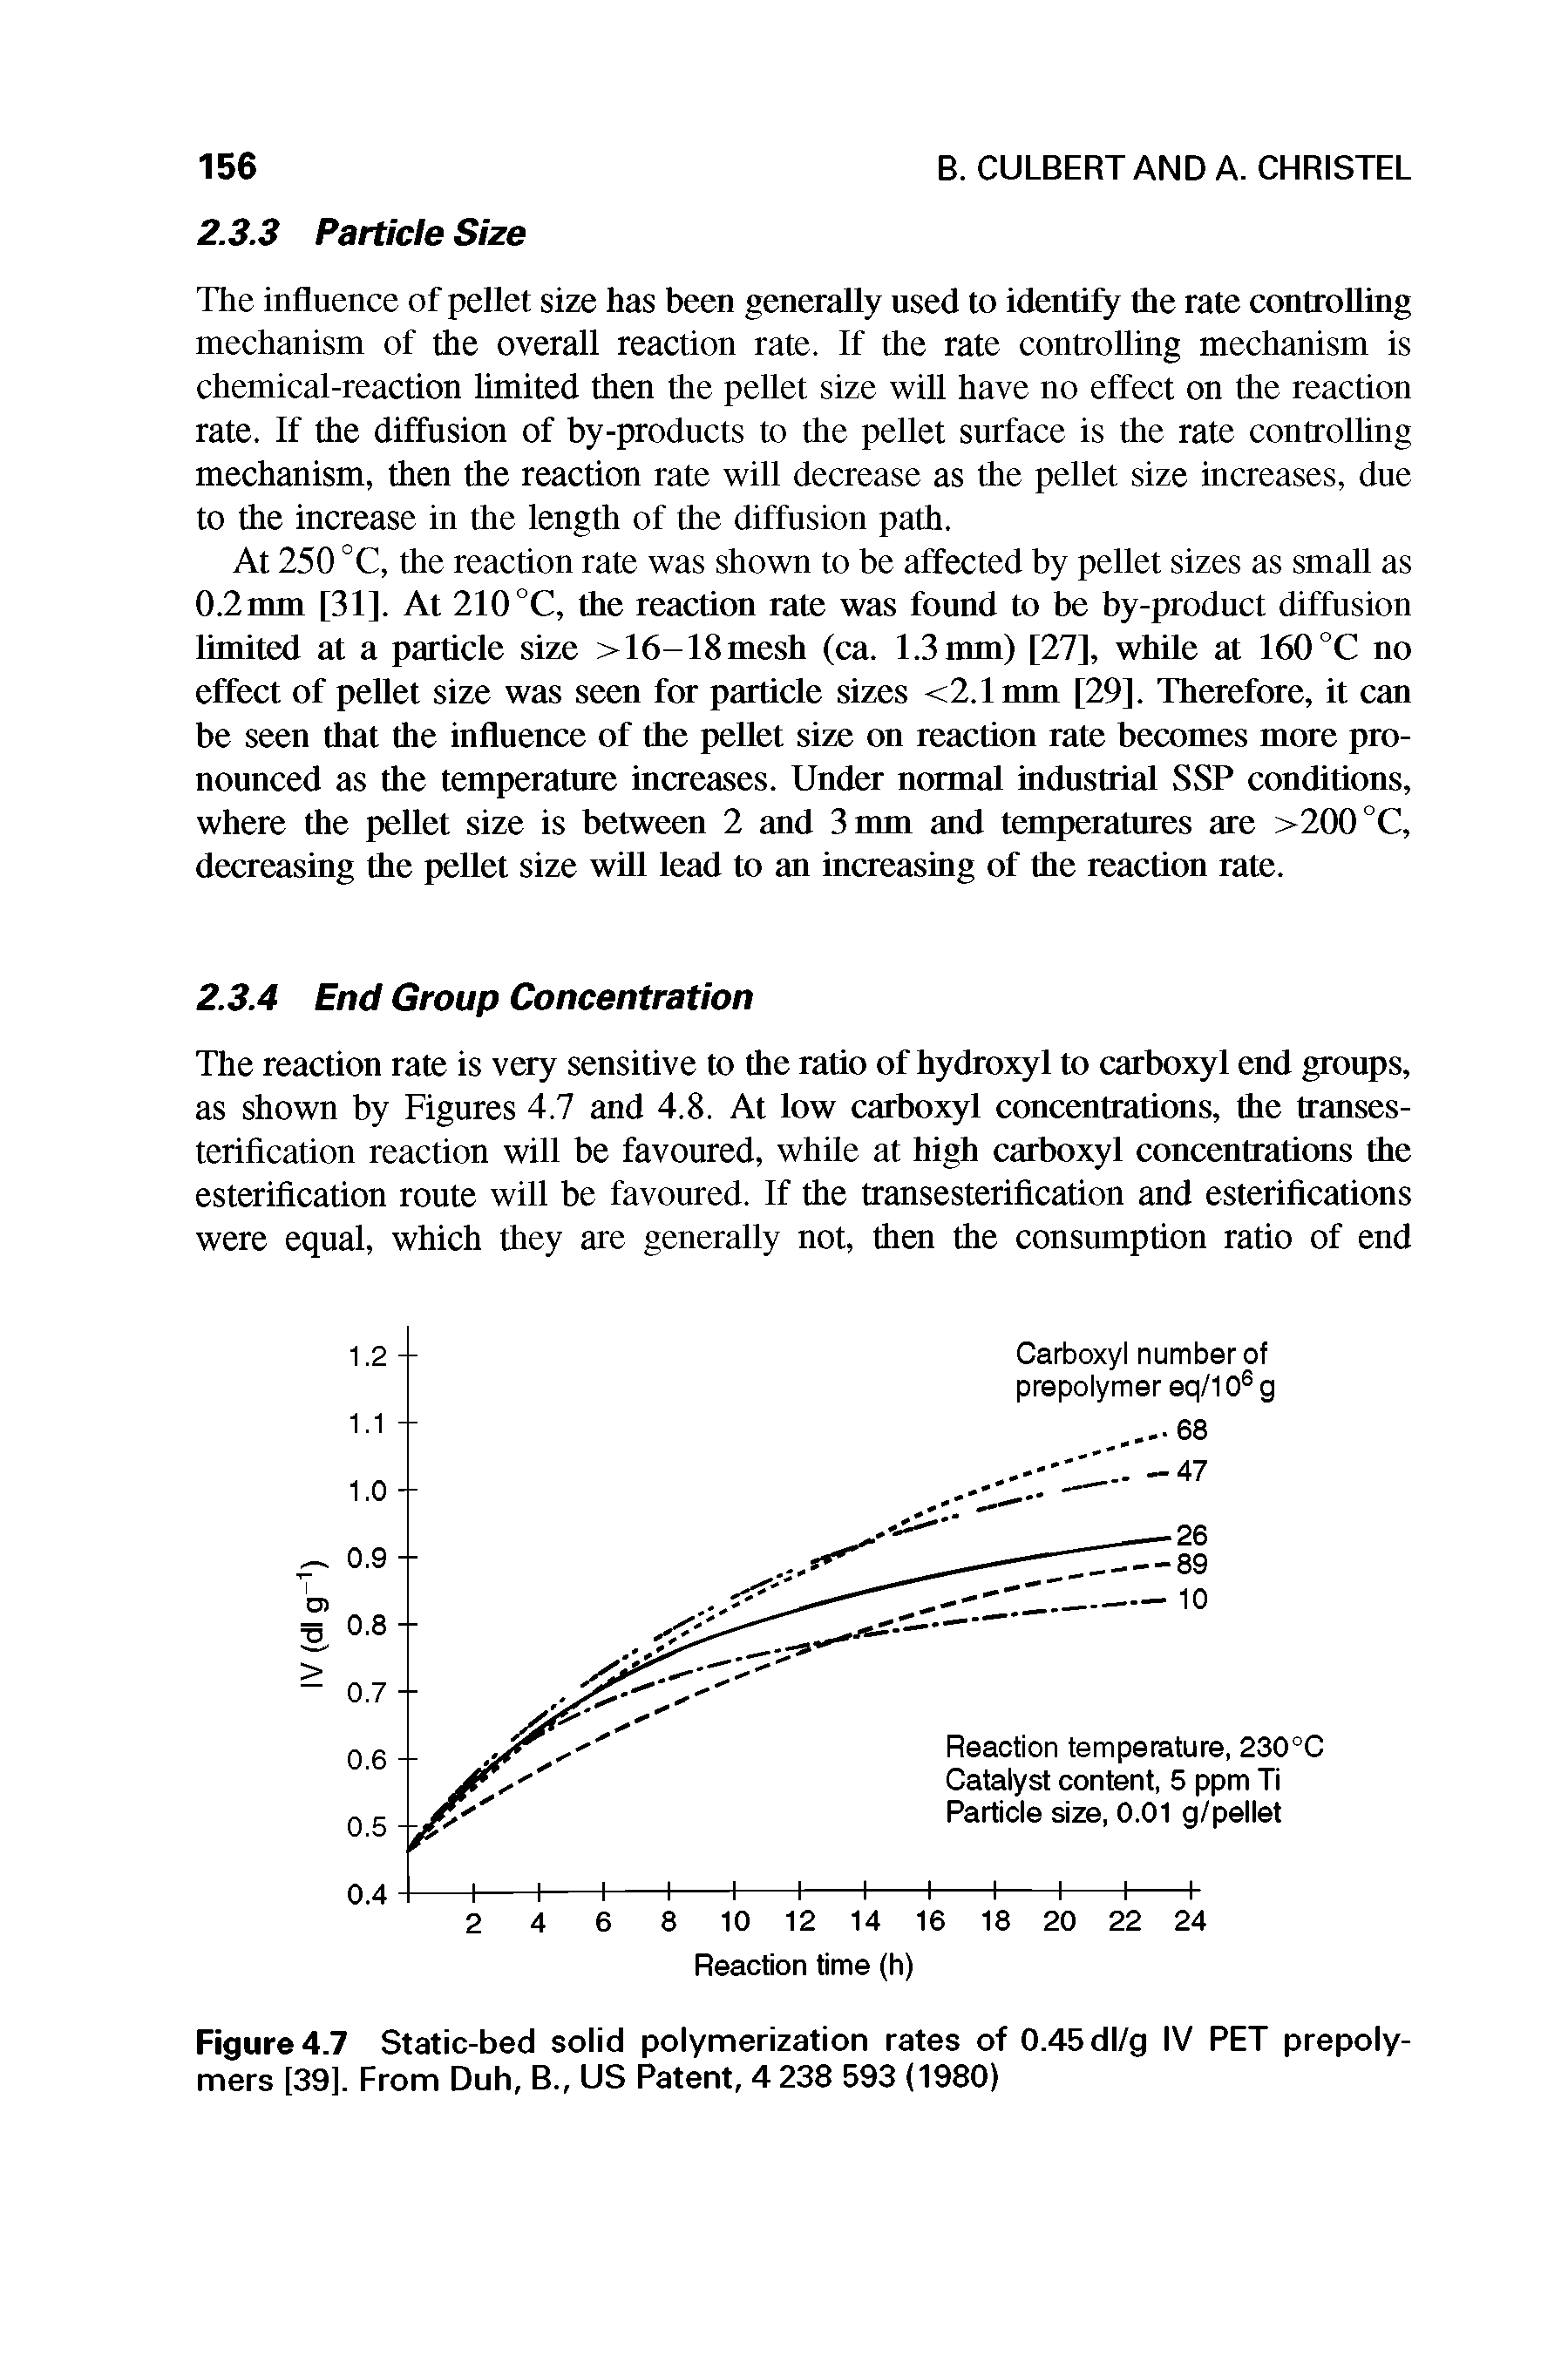 Figure 4.7 Static-bed solid polymerization rates of 0.45 dl/g IV PET prepolymers [39]. From Duh, B., US Patent, 4 238 593 (1980)...